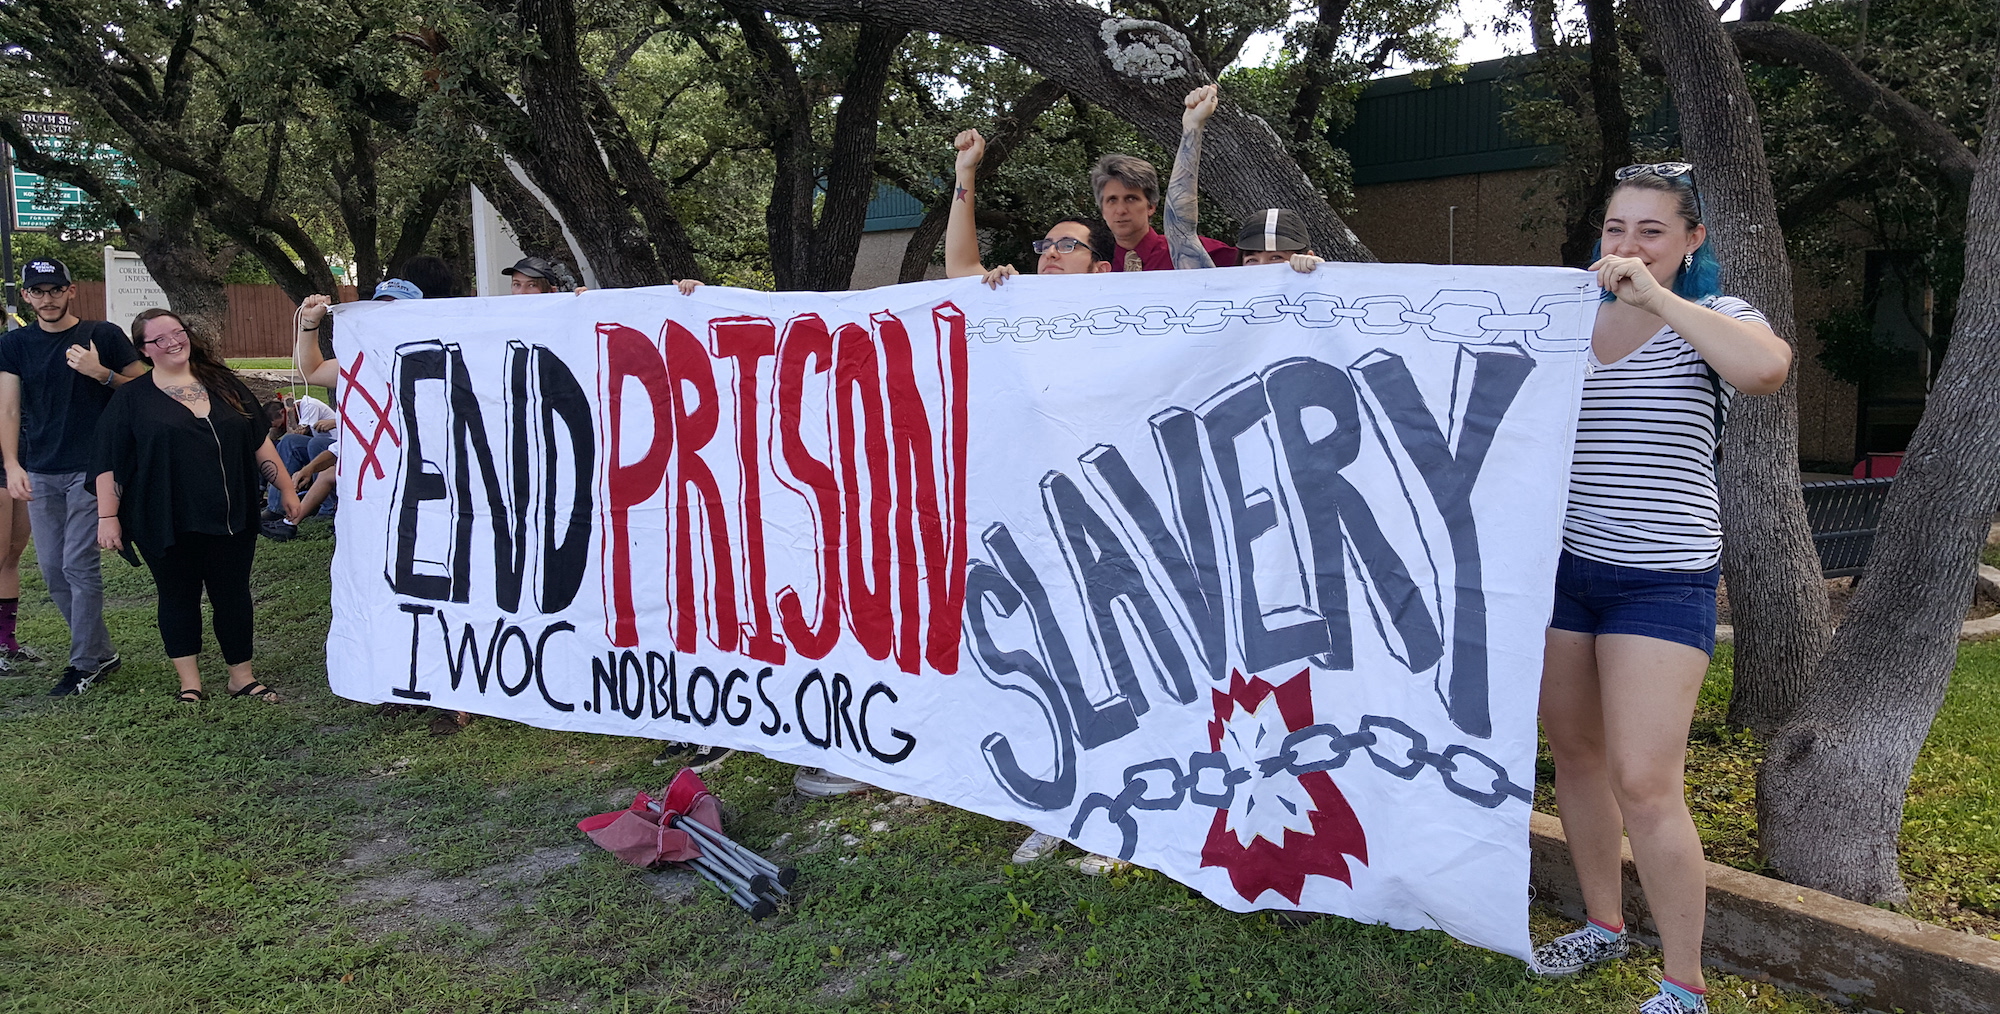 Austin protesters, demonstrating at the same time as hundreds of incarcerated people across the country, cast unpaid prison labor as modern-day 'slavery.'